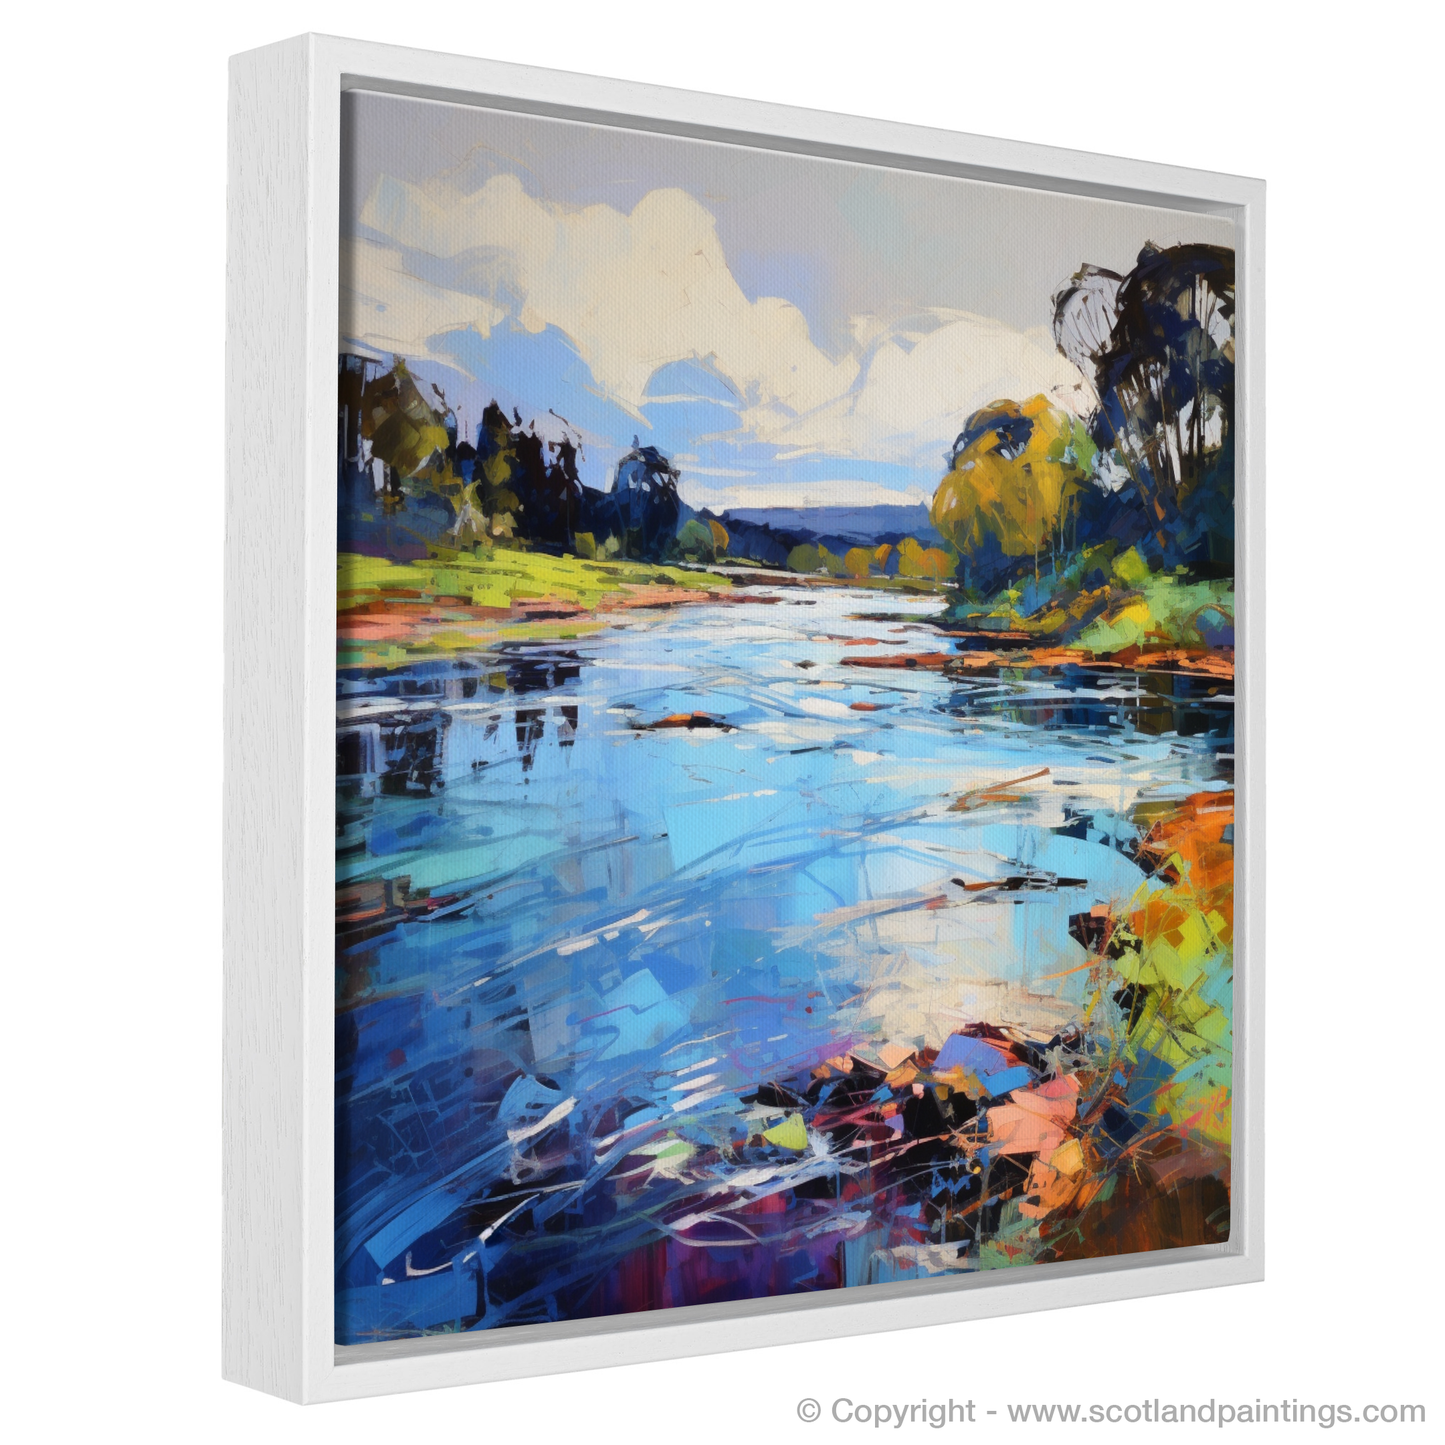 Painting and Art Print of River Leven, West Dunbartonshire entitled "River Leven's Vivid Embrace".